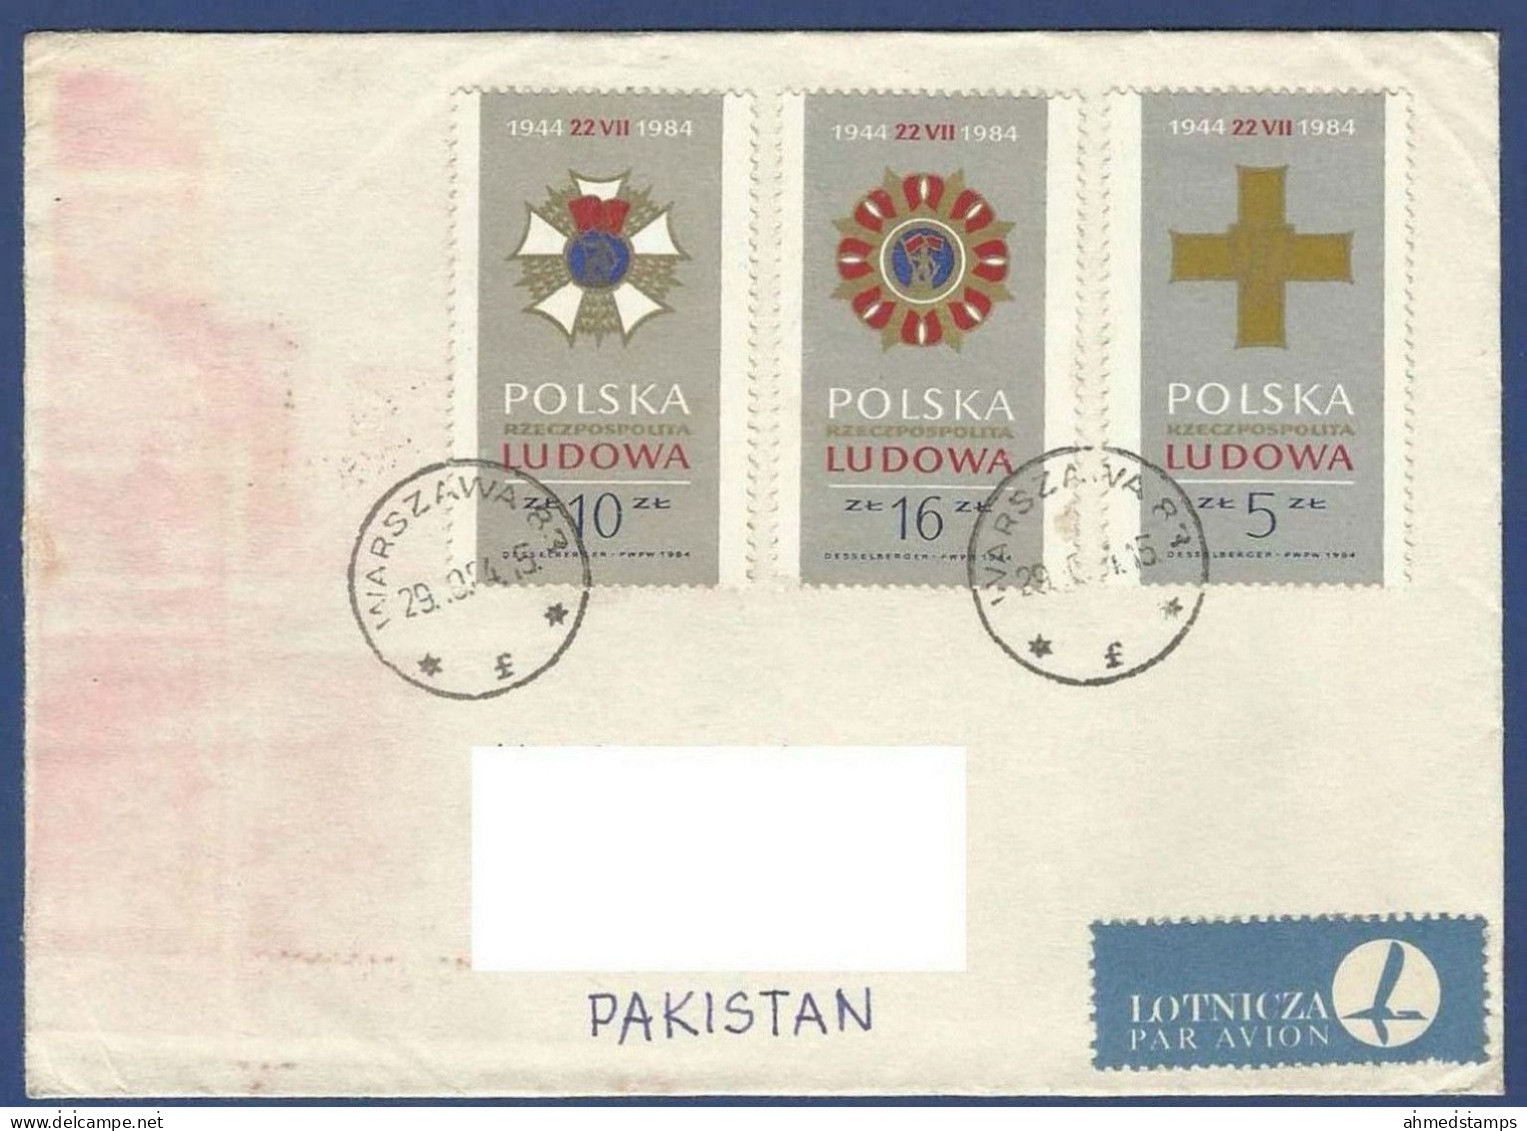 POLAND POSTAL USED AIRMAIL COVER TO PAKISTAN - Ohne Zuordnung